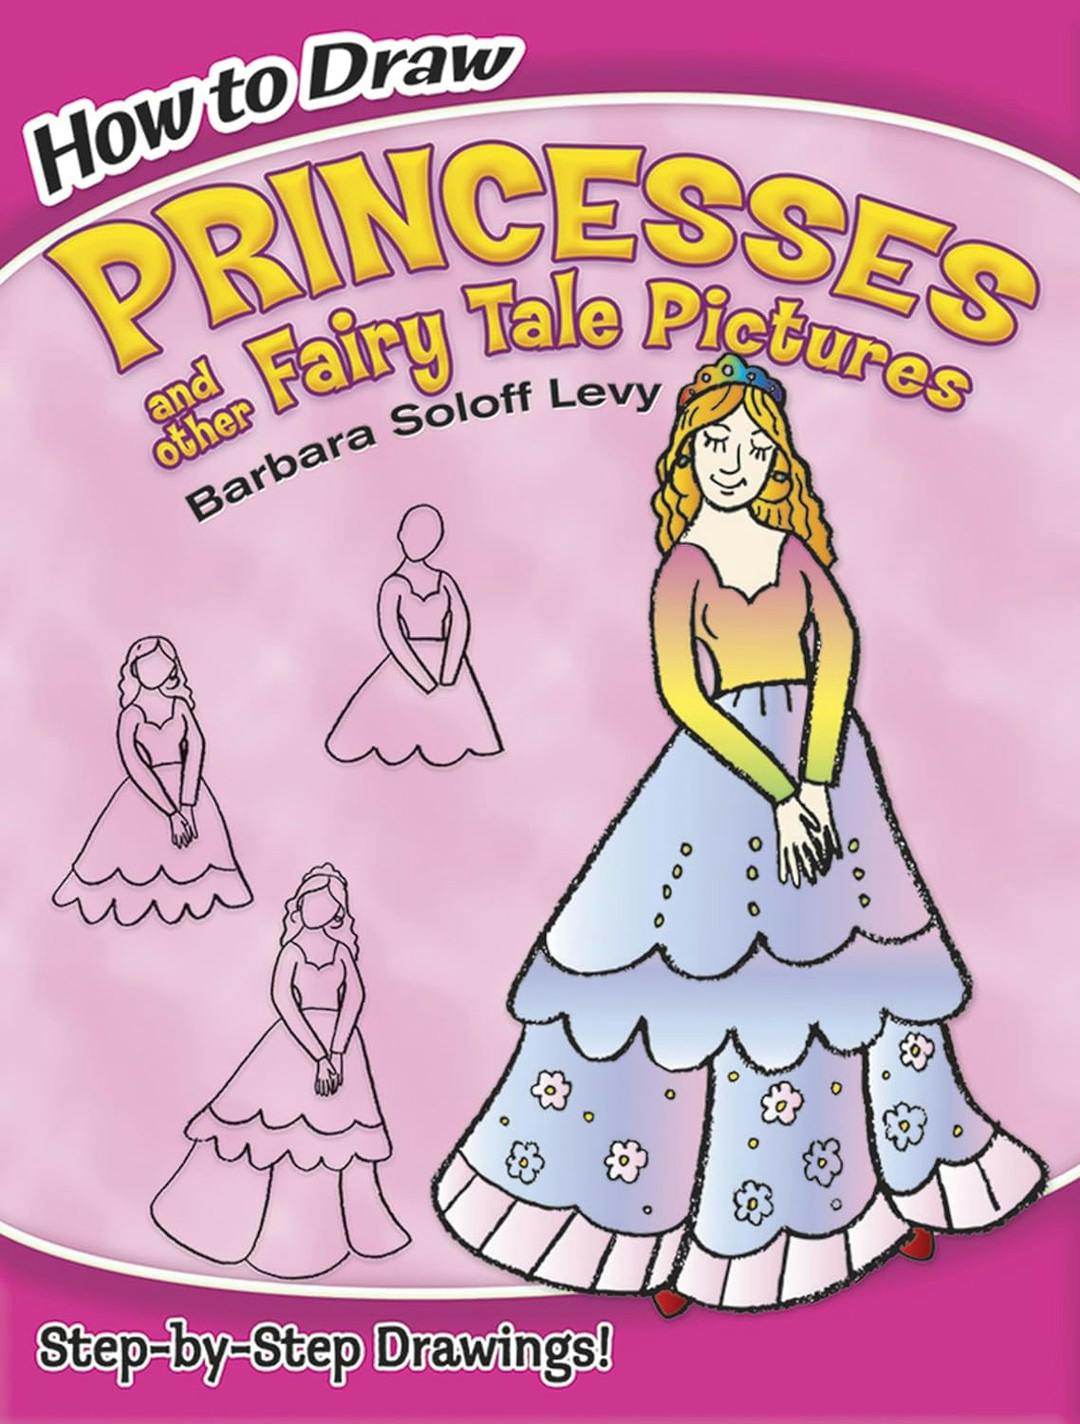 How to Draw: Princesses and other Fairy Tale Pictures